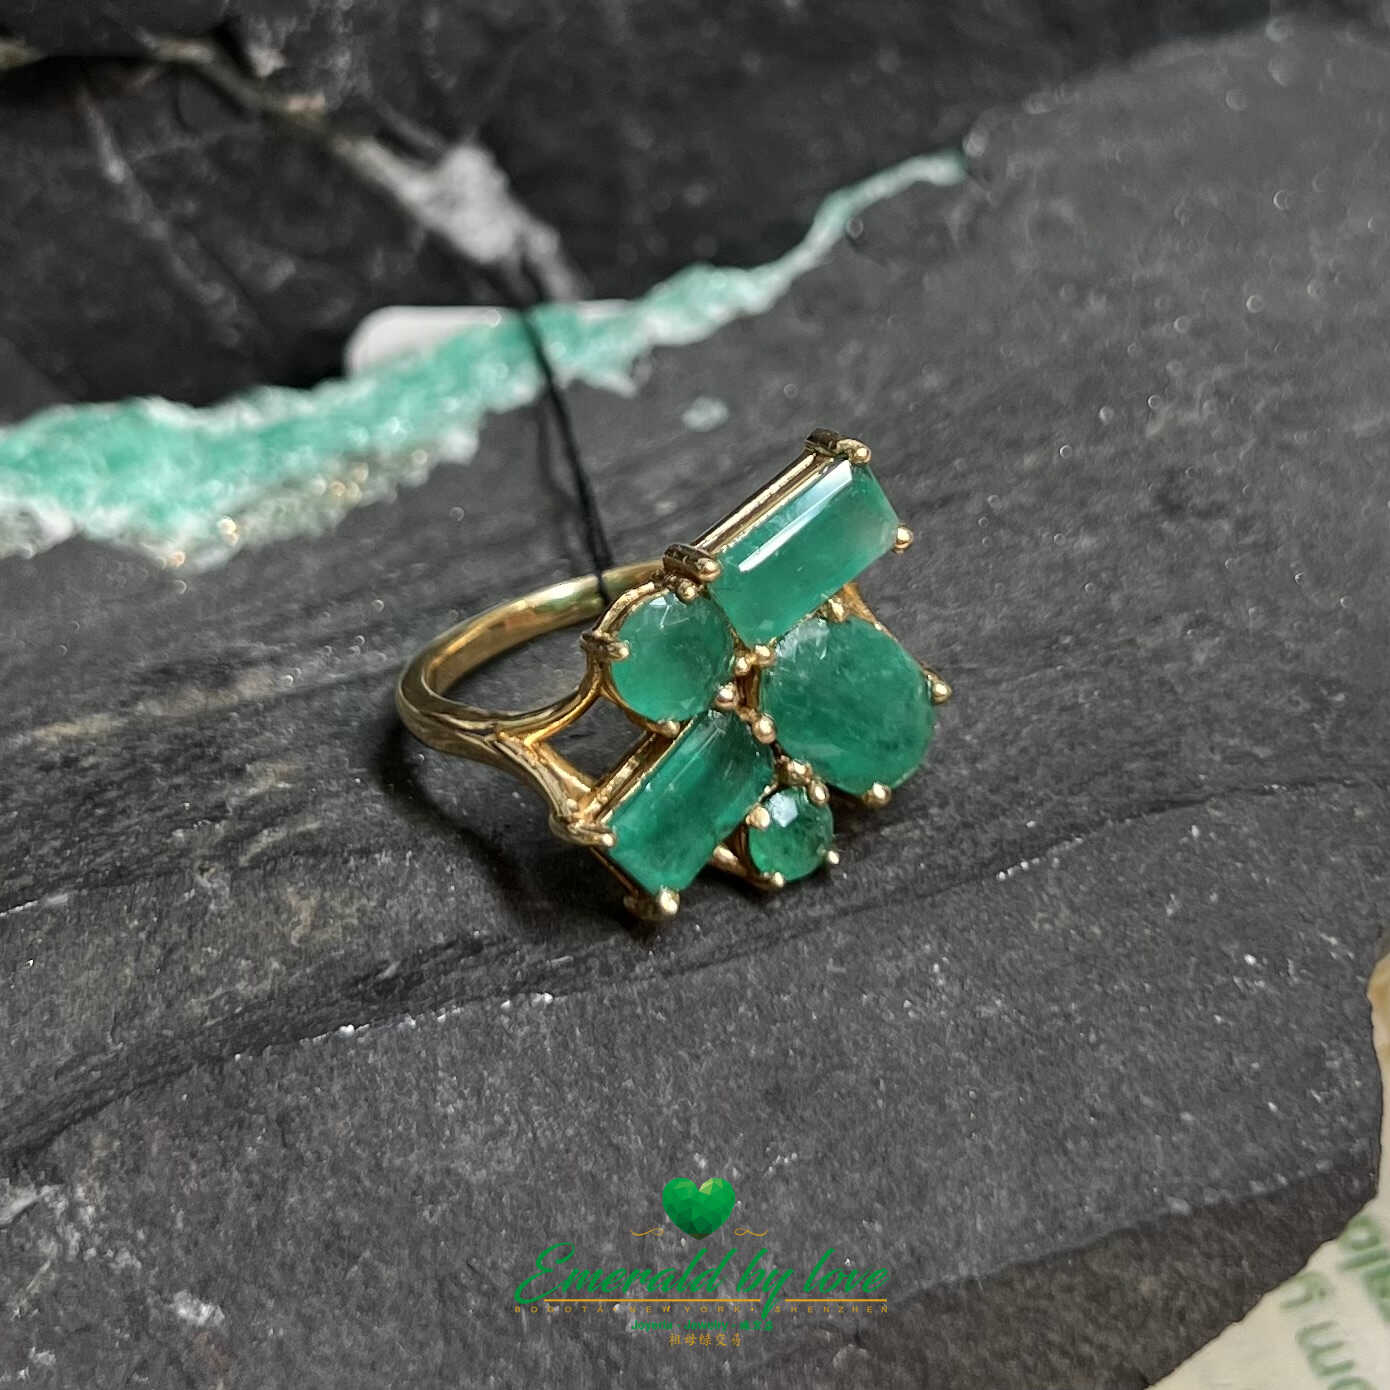 Vibrant Yellow Gold Crazy Ring: Assorted Emeralds for a Playful Statement